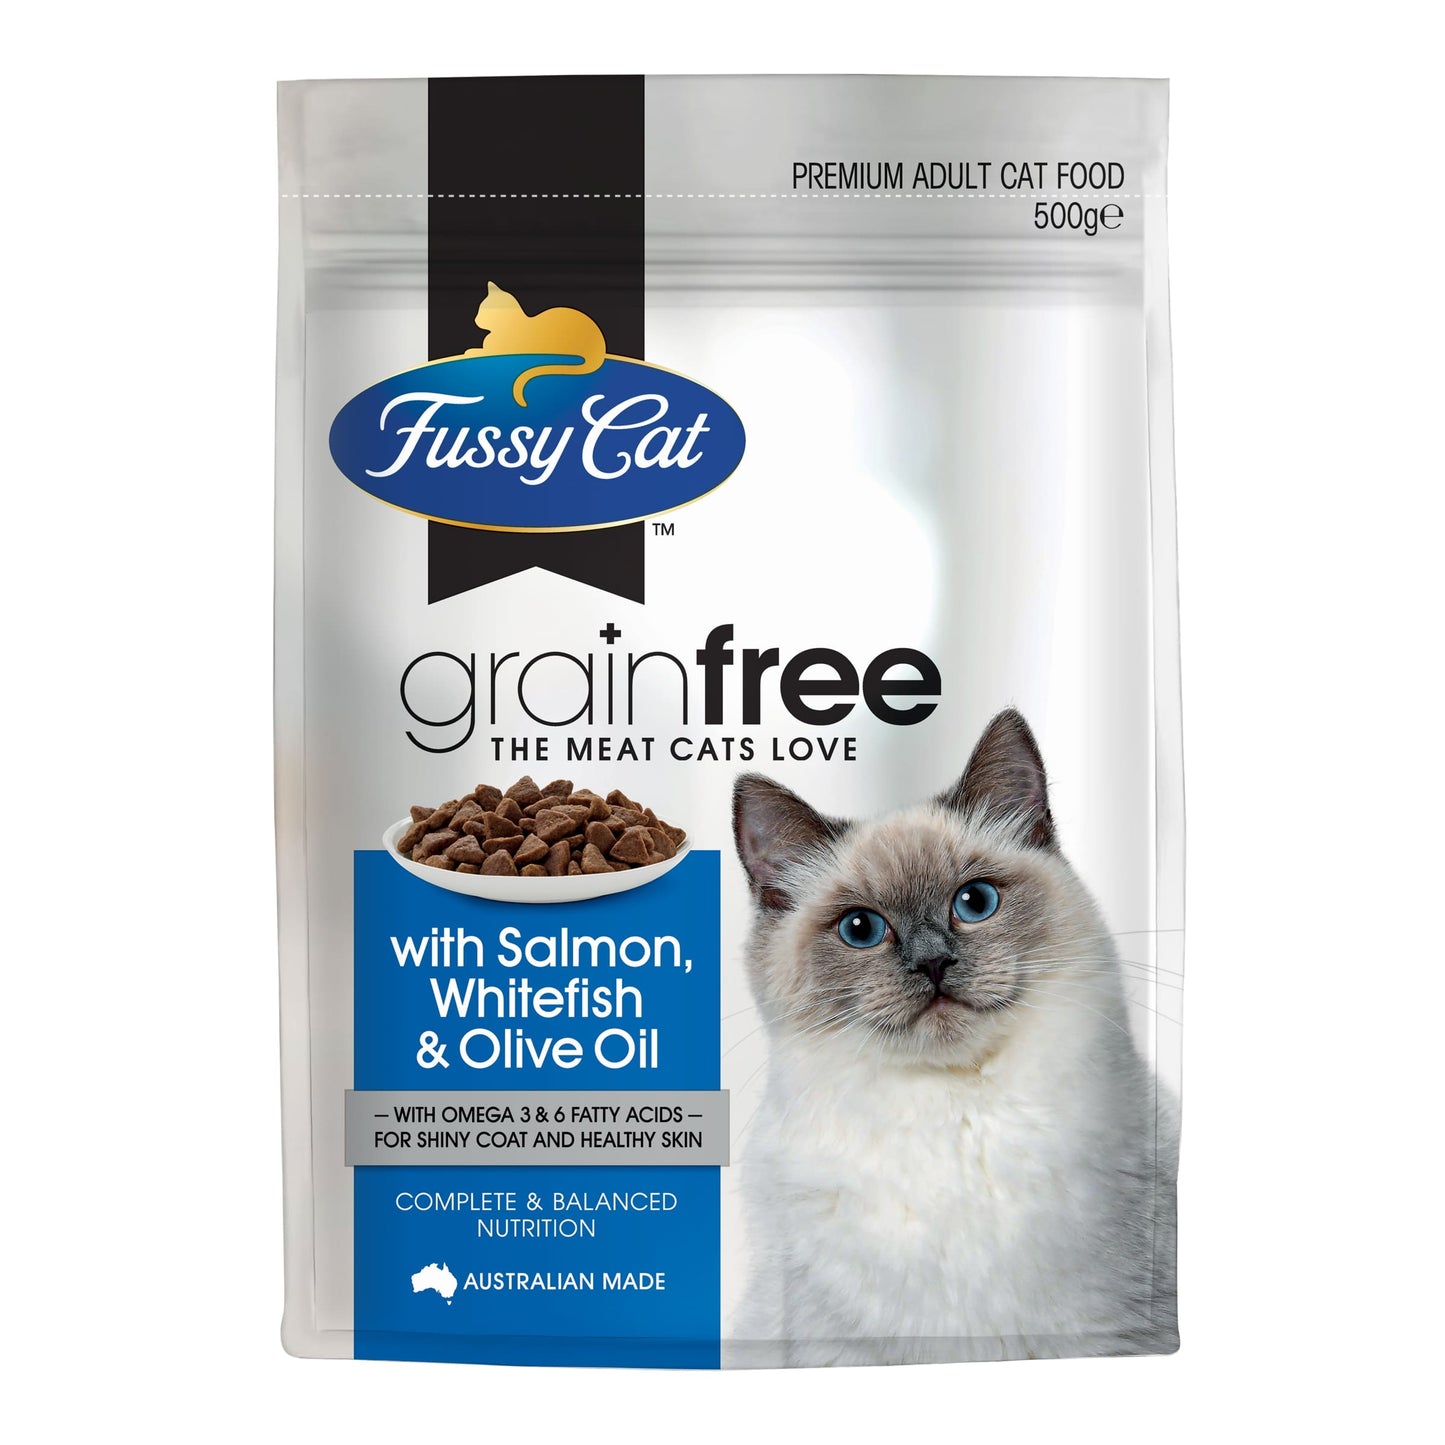 Fussy Cat Adult Grain Free Salmon, Whitefish & Olive Oil 500g x 6